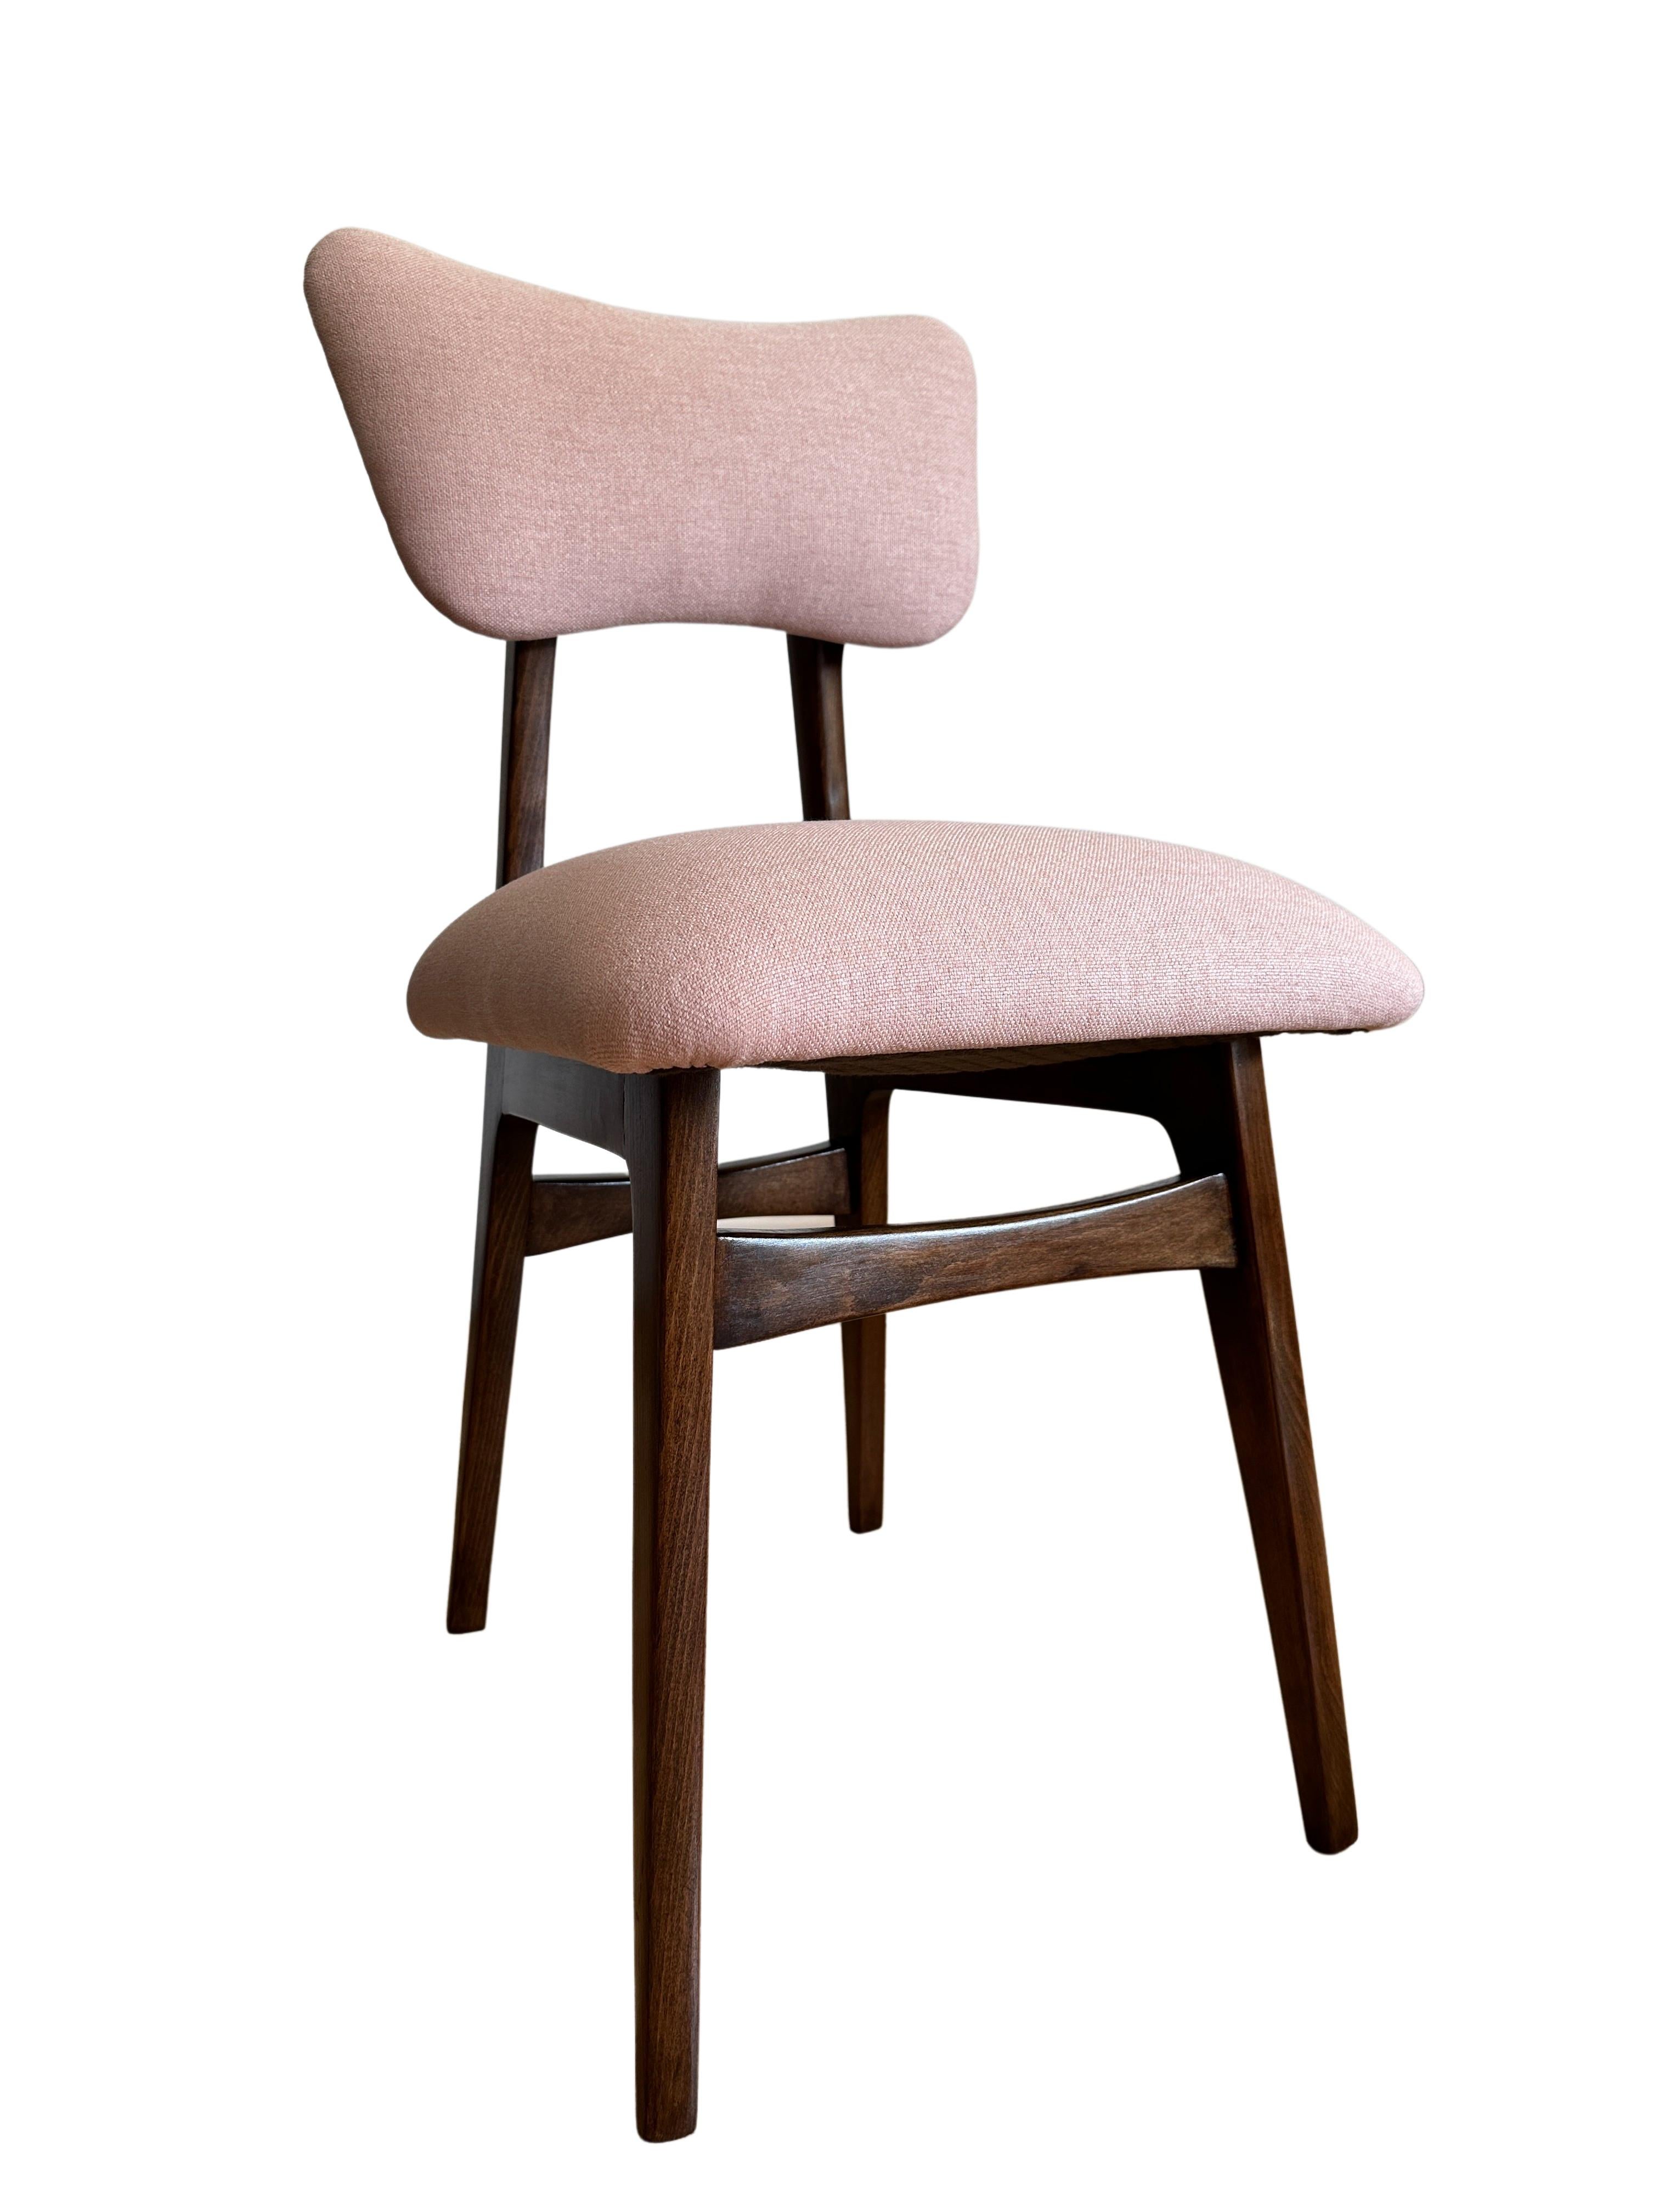 Set of 6 Midcentury Light Pink Dining Chairs, Europe, 1960s For Sale 1